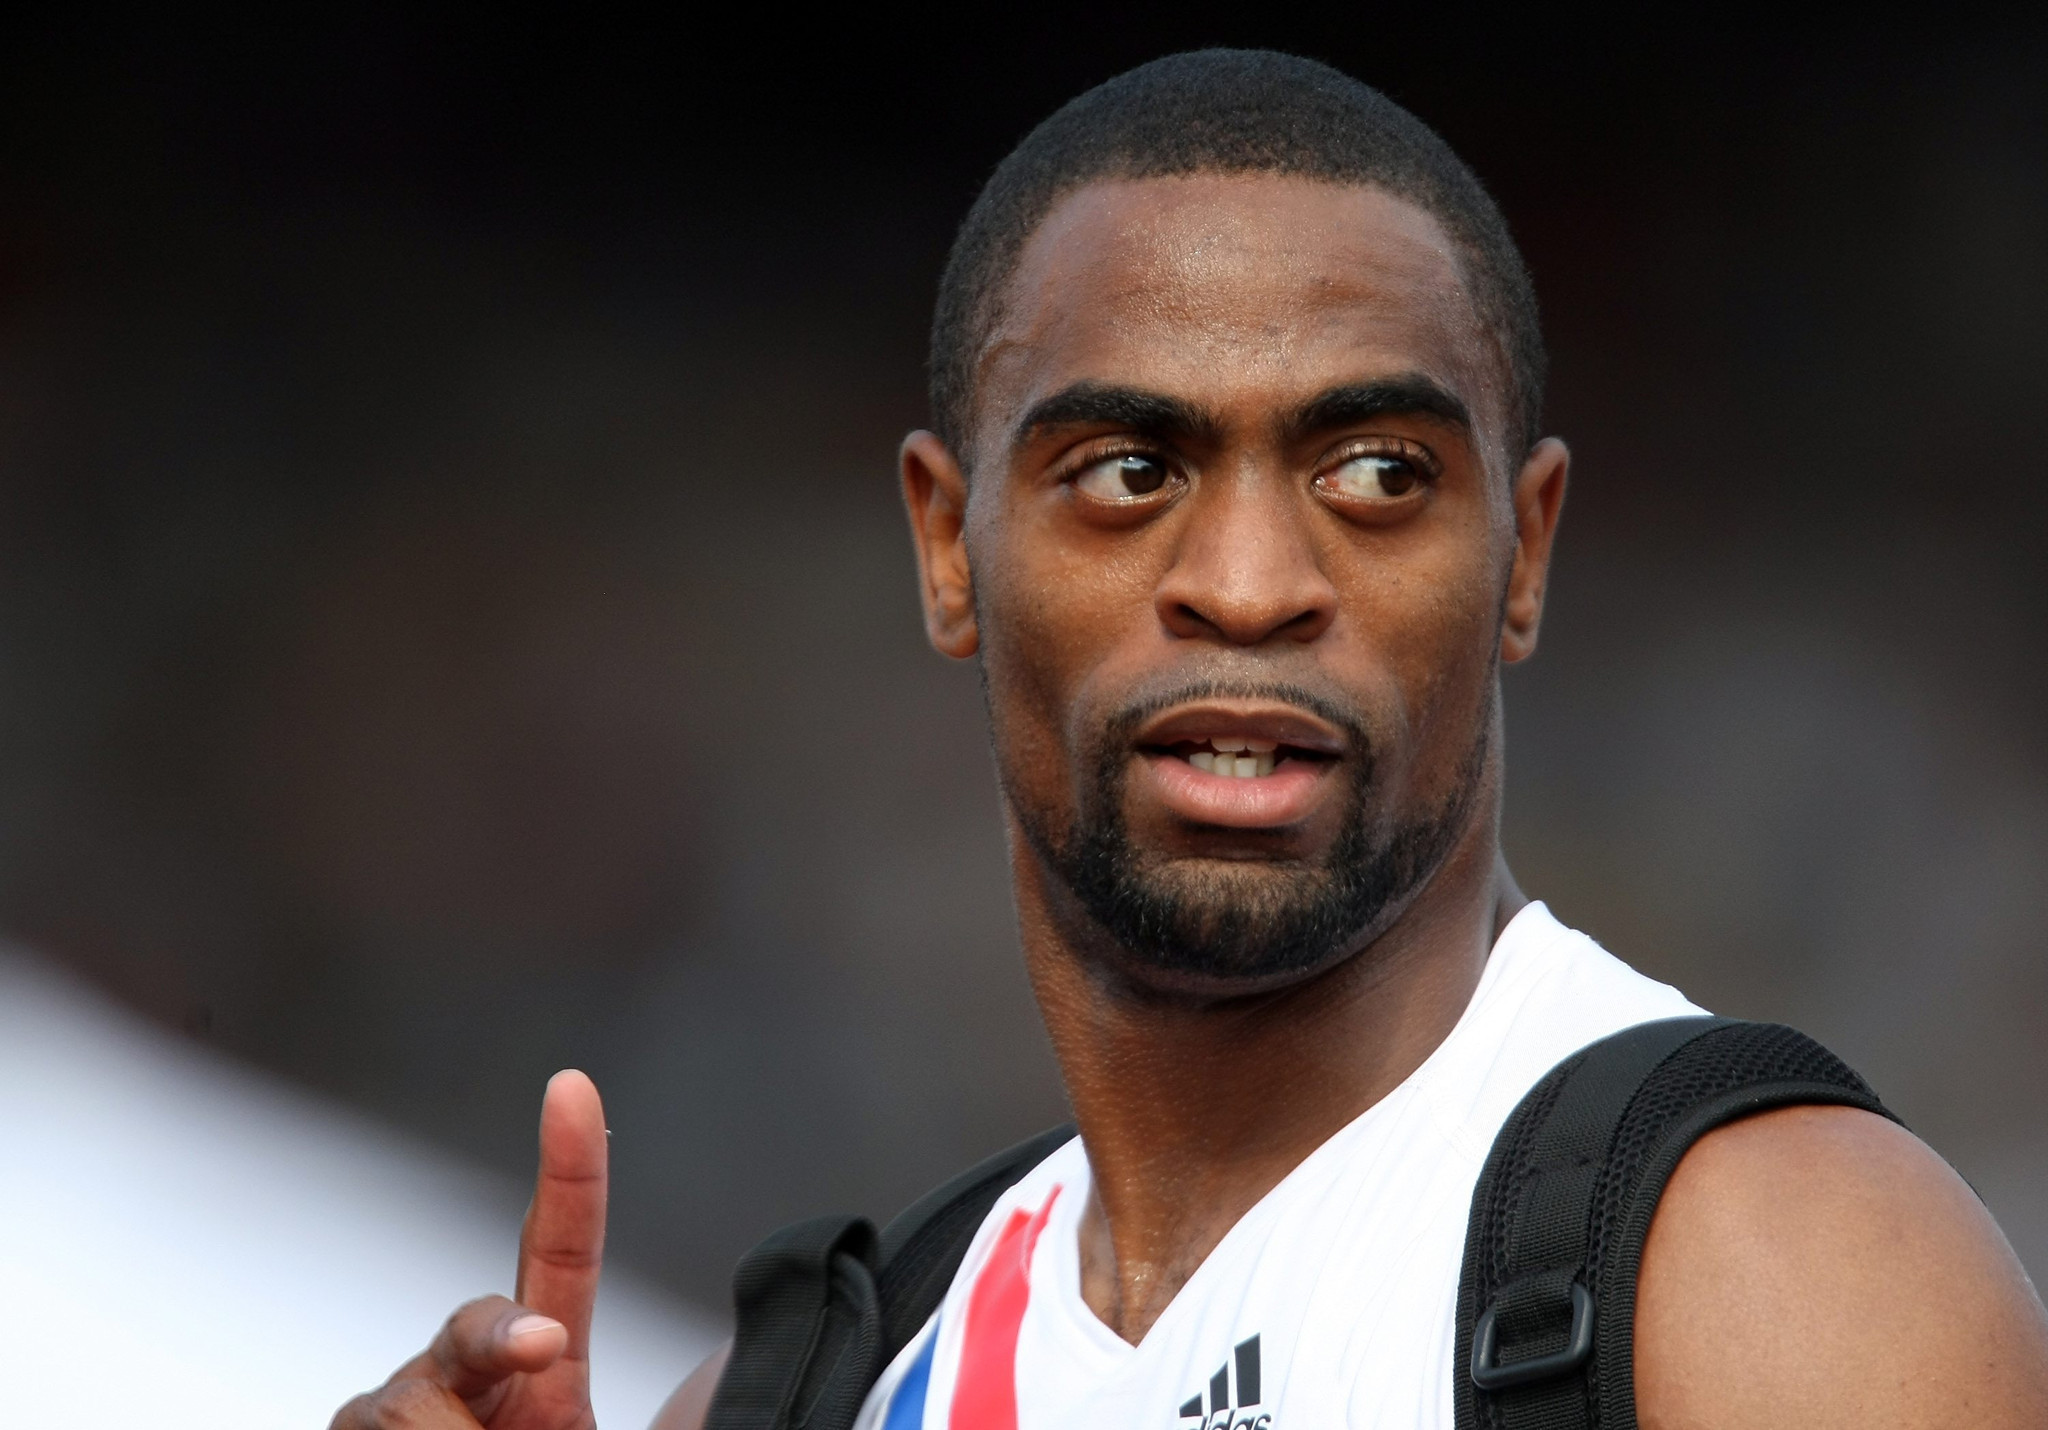 Usain Bolt says Tyson Gay should be banned for life